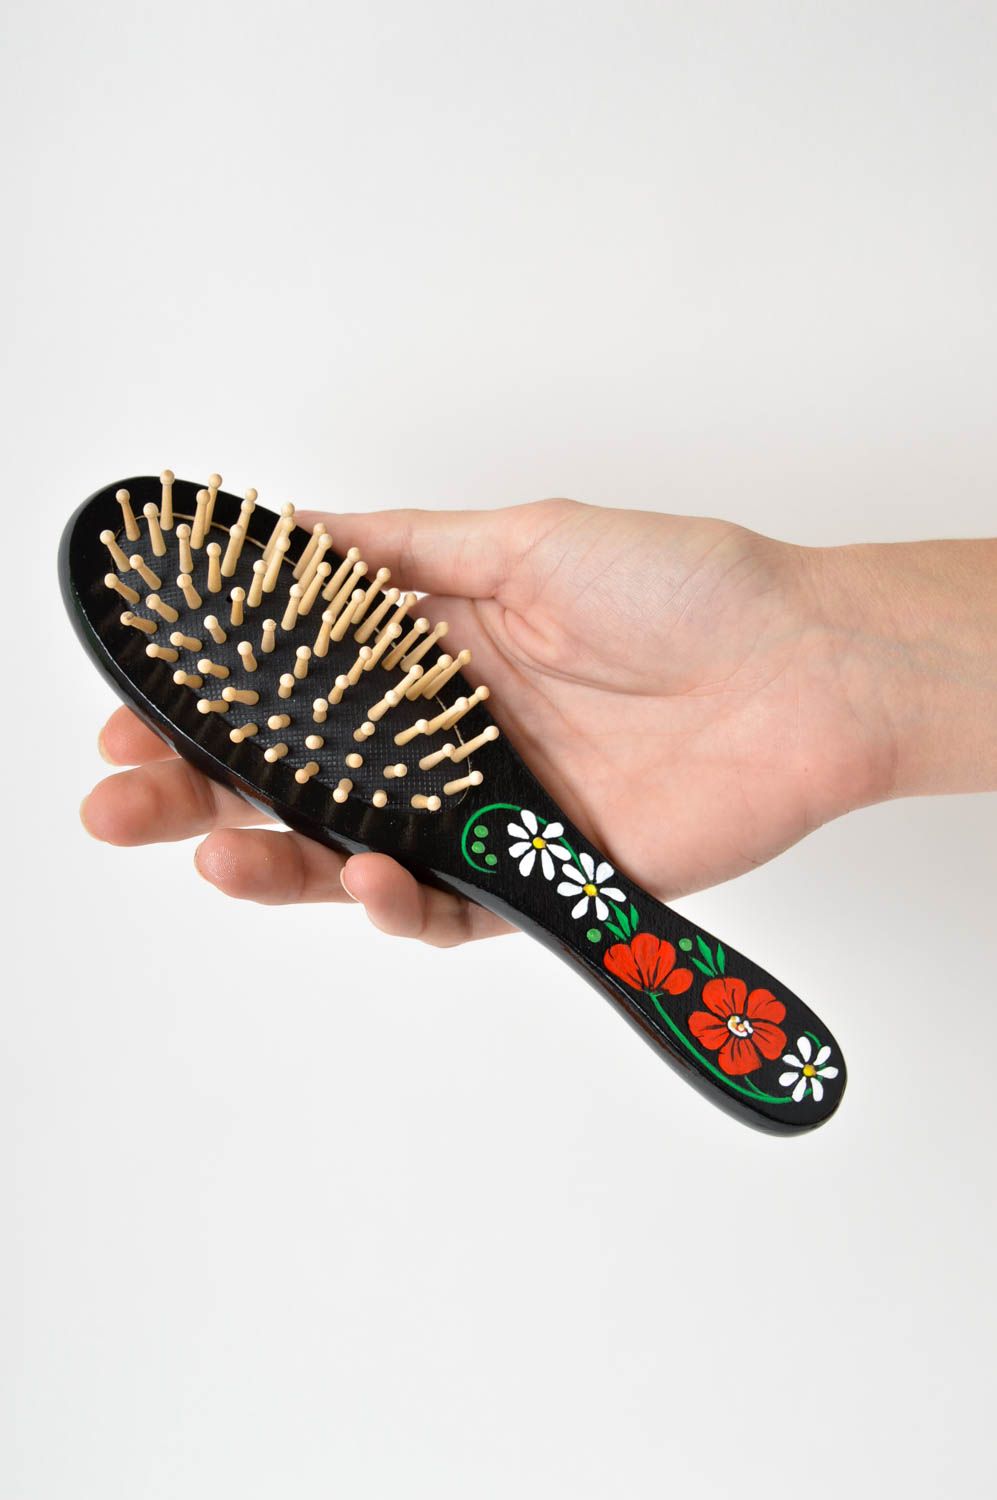 Unusual handmade wooden hairbrush long hair ideas wood craft gifts for her photo 5